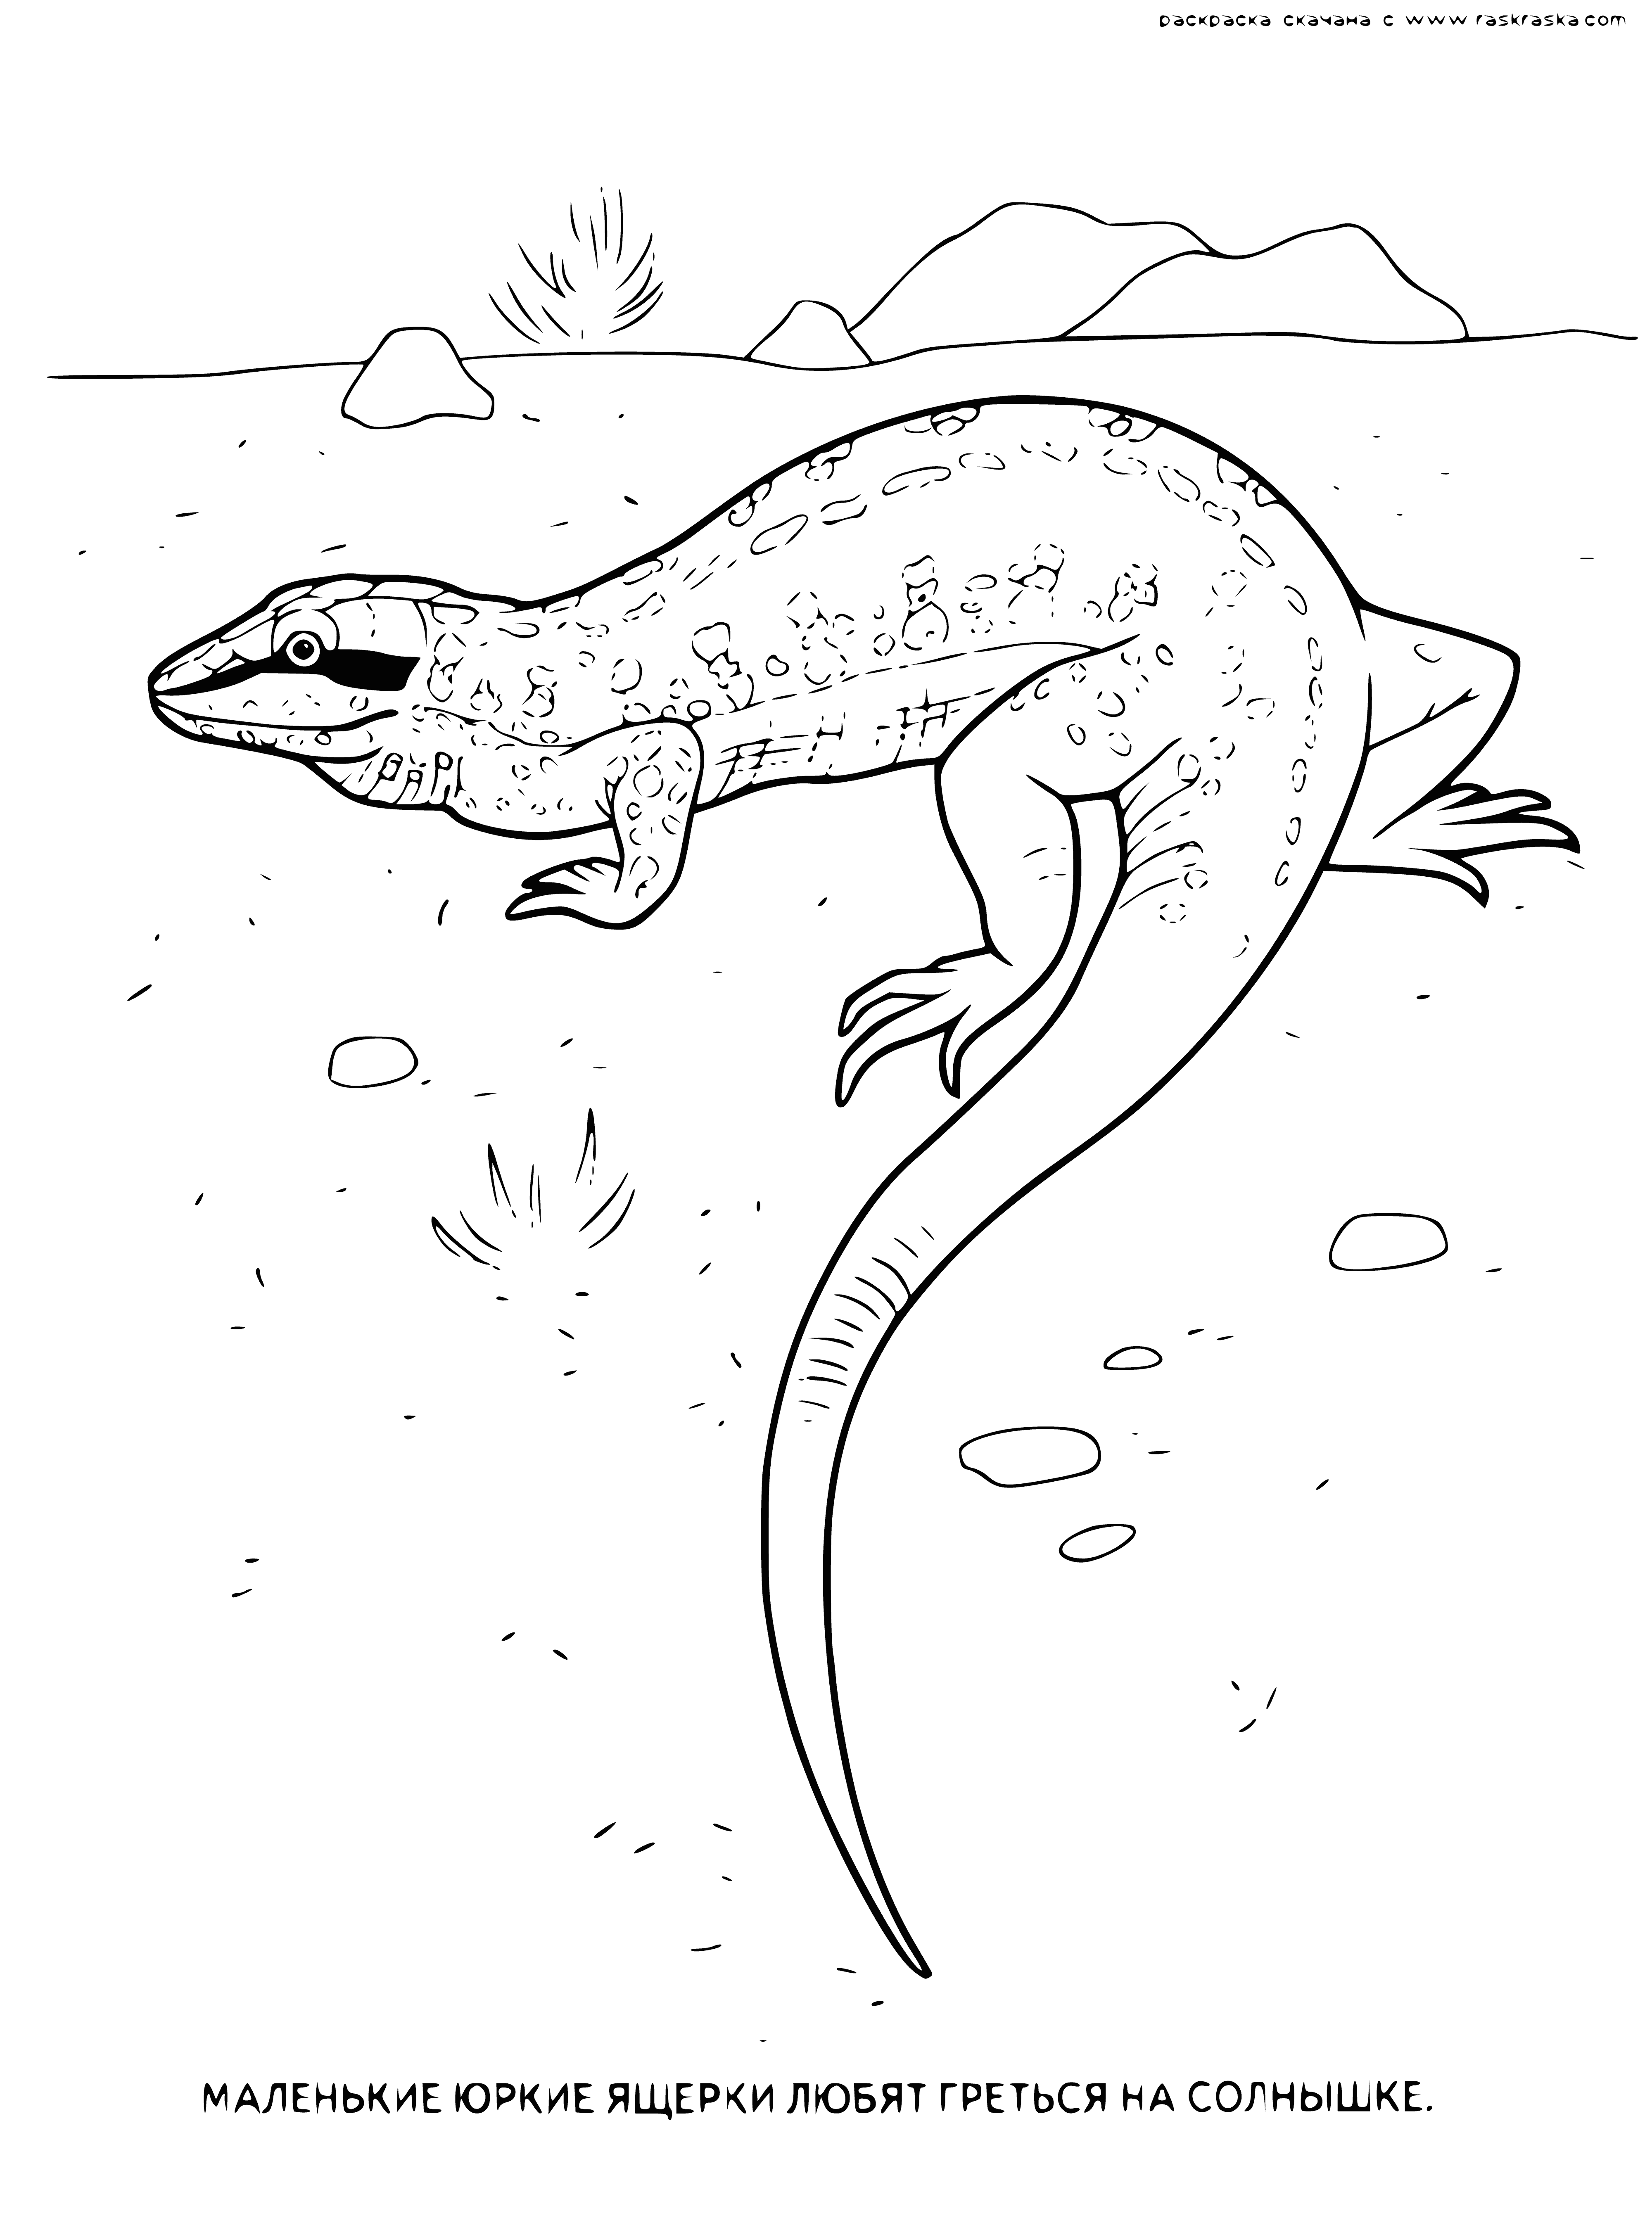 coloring page: Brown lizard with black spots stares at the camera, perched on a branch with long tail. #Wildlife